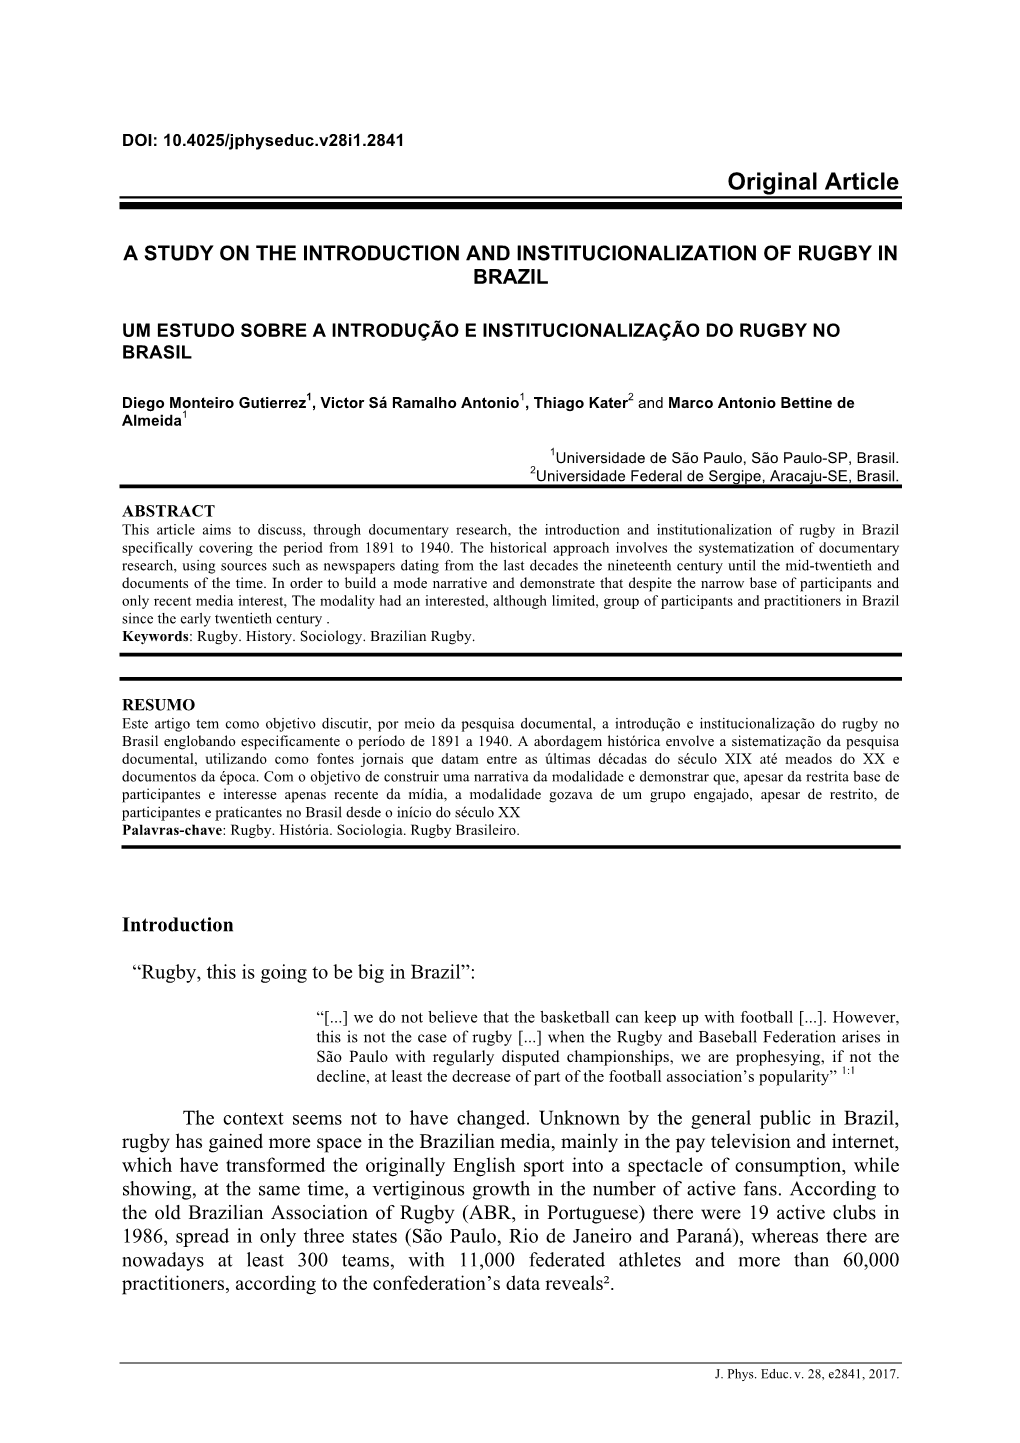 A Study on the Introduction and Institucionalization of Rugby in Brazil